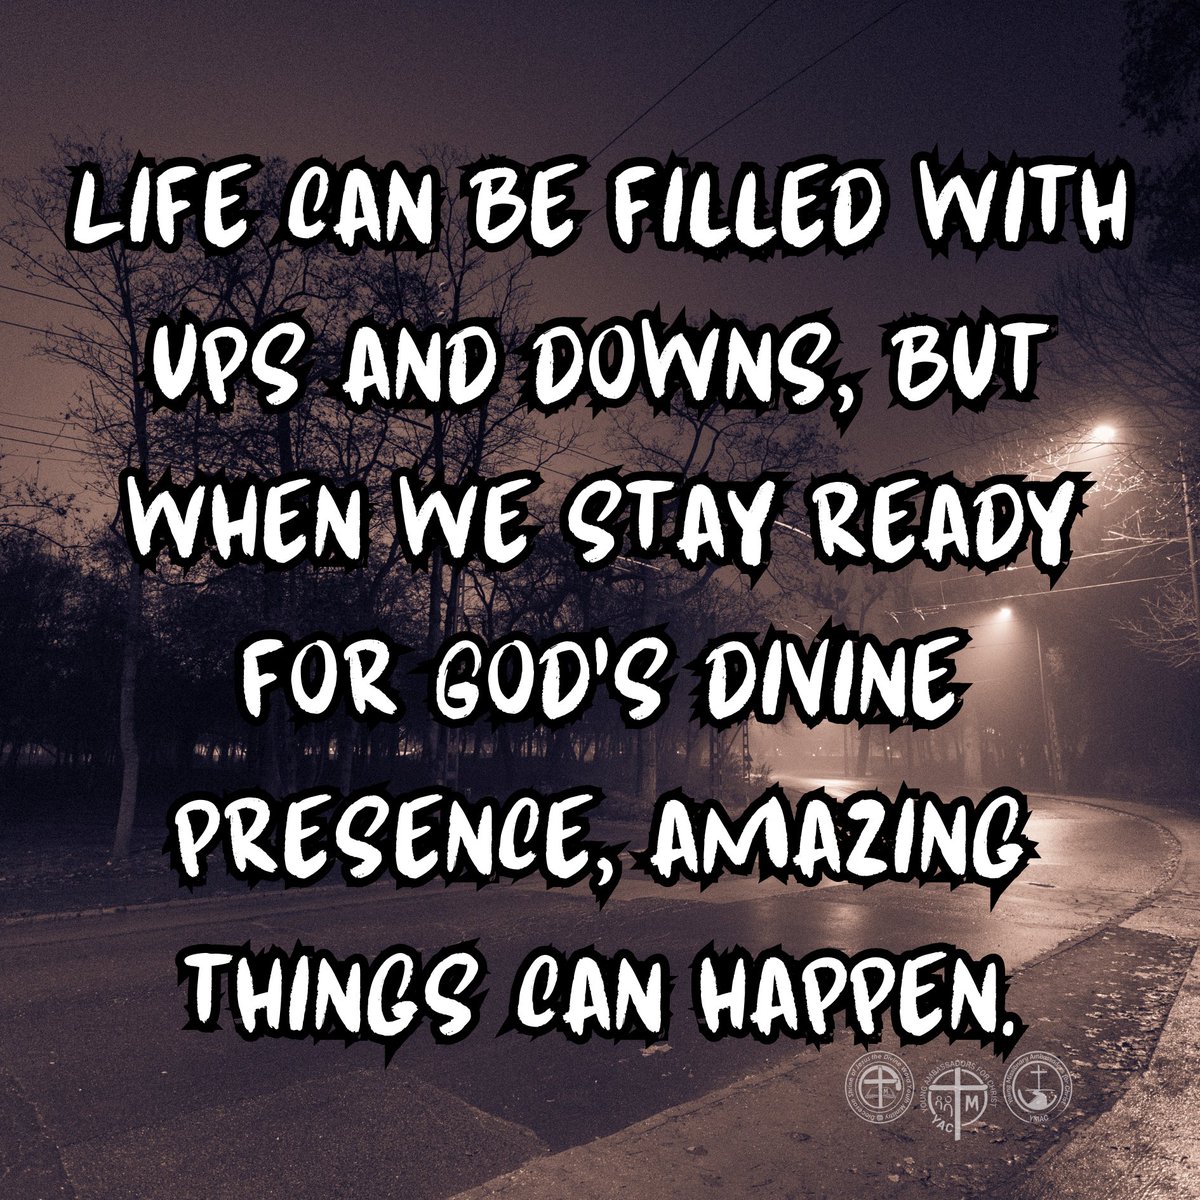 Life can be filled with ups and downs, but when we stay ready for God's divine presence, amazing things can happen.

#faith #spirituality #divineguidance #thankful #serveothers #blessed

***

#YAC #YMAC #SYM #SVDyouth 
#SHRINEyouthMinistry #ShrineYouth